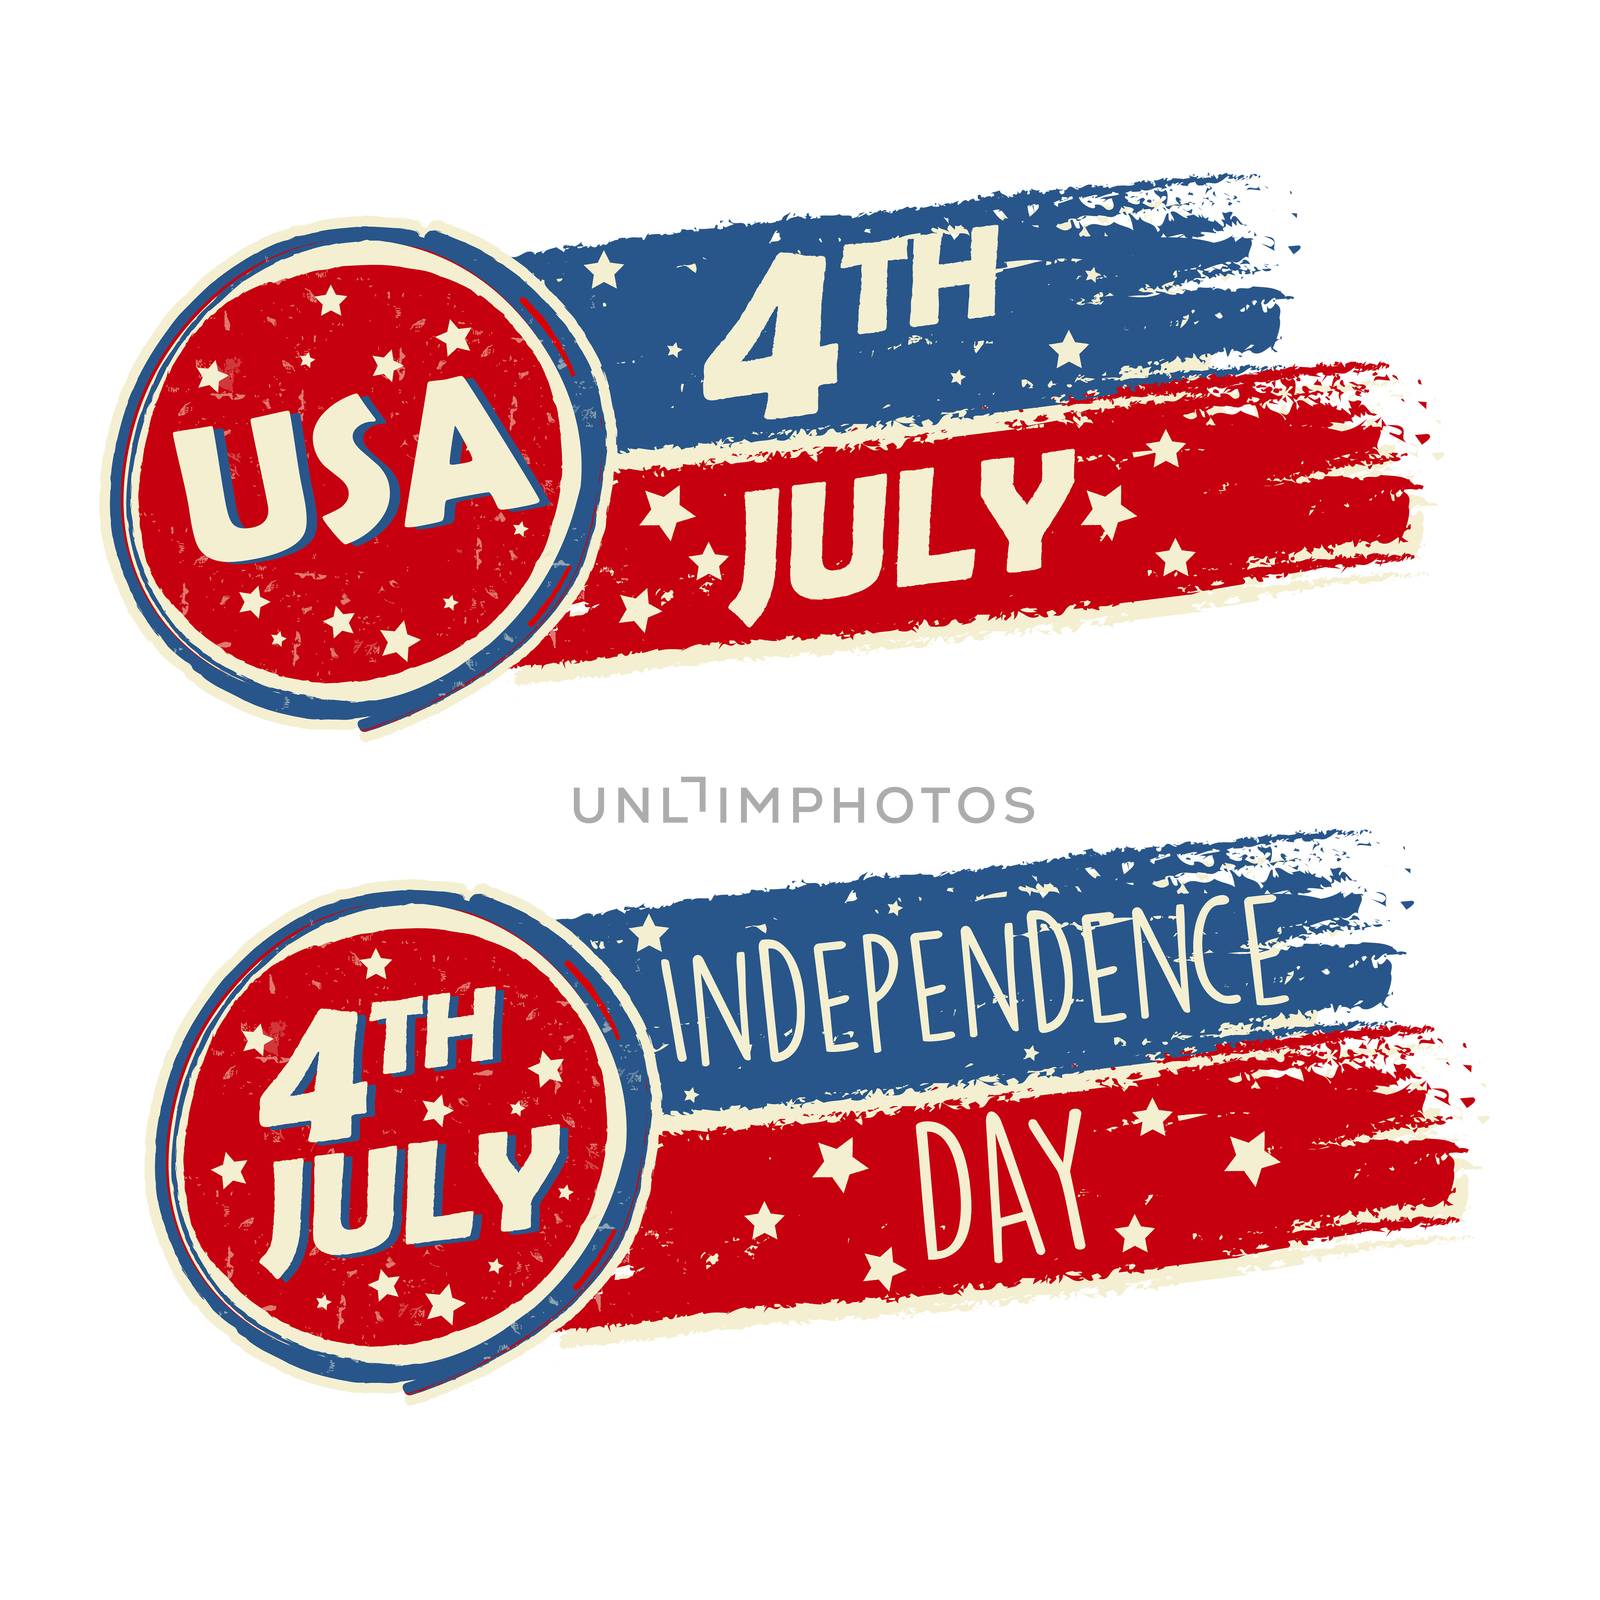 USA Independence Day and 4th of July with stars in drawing banne by marinini